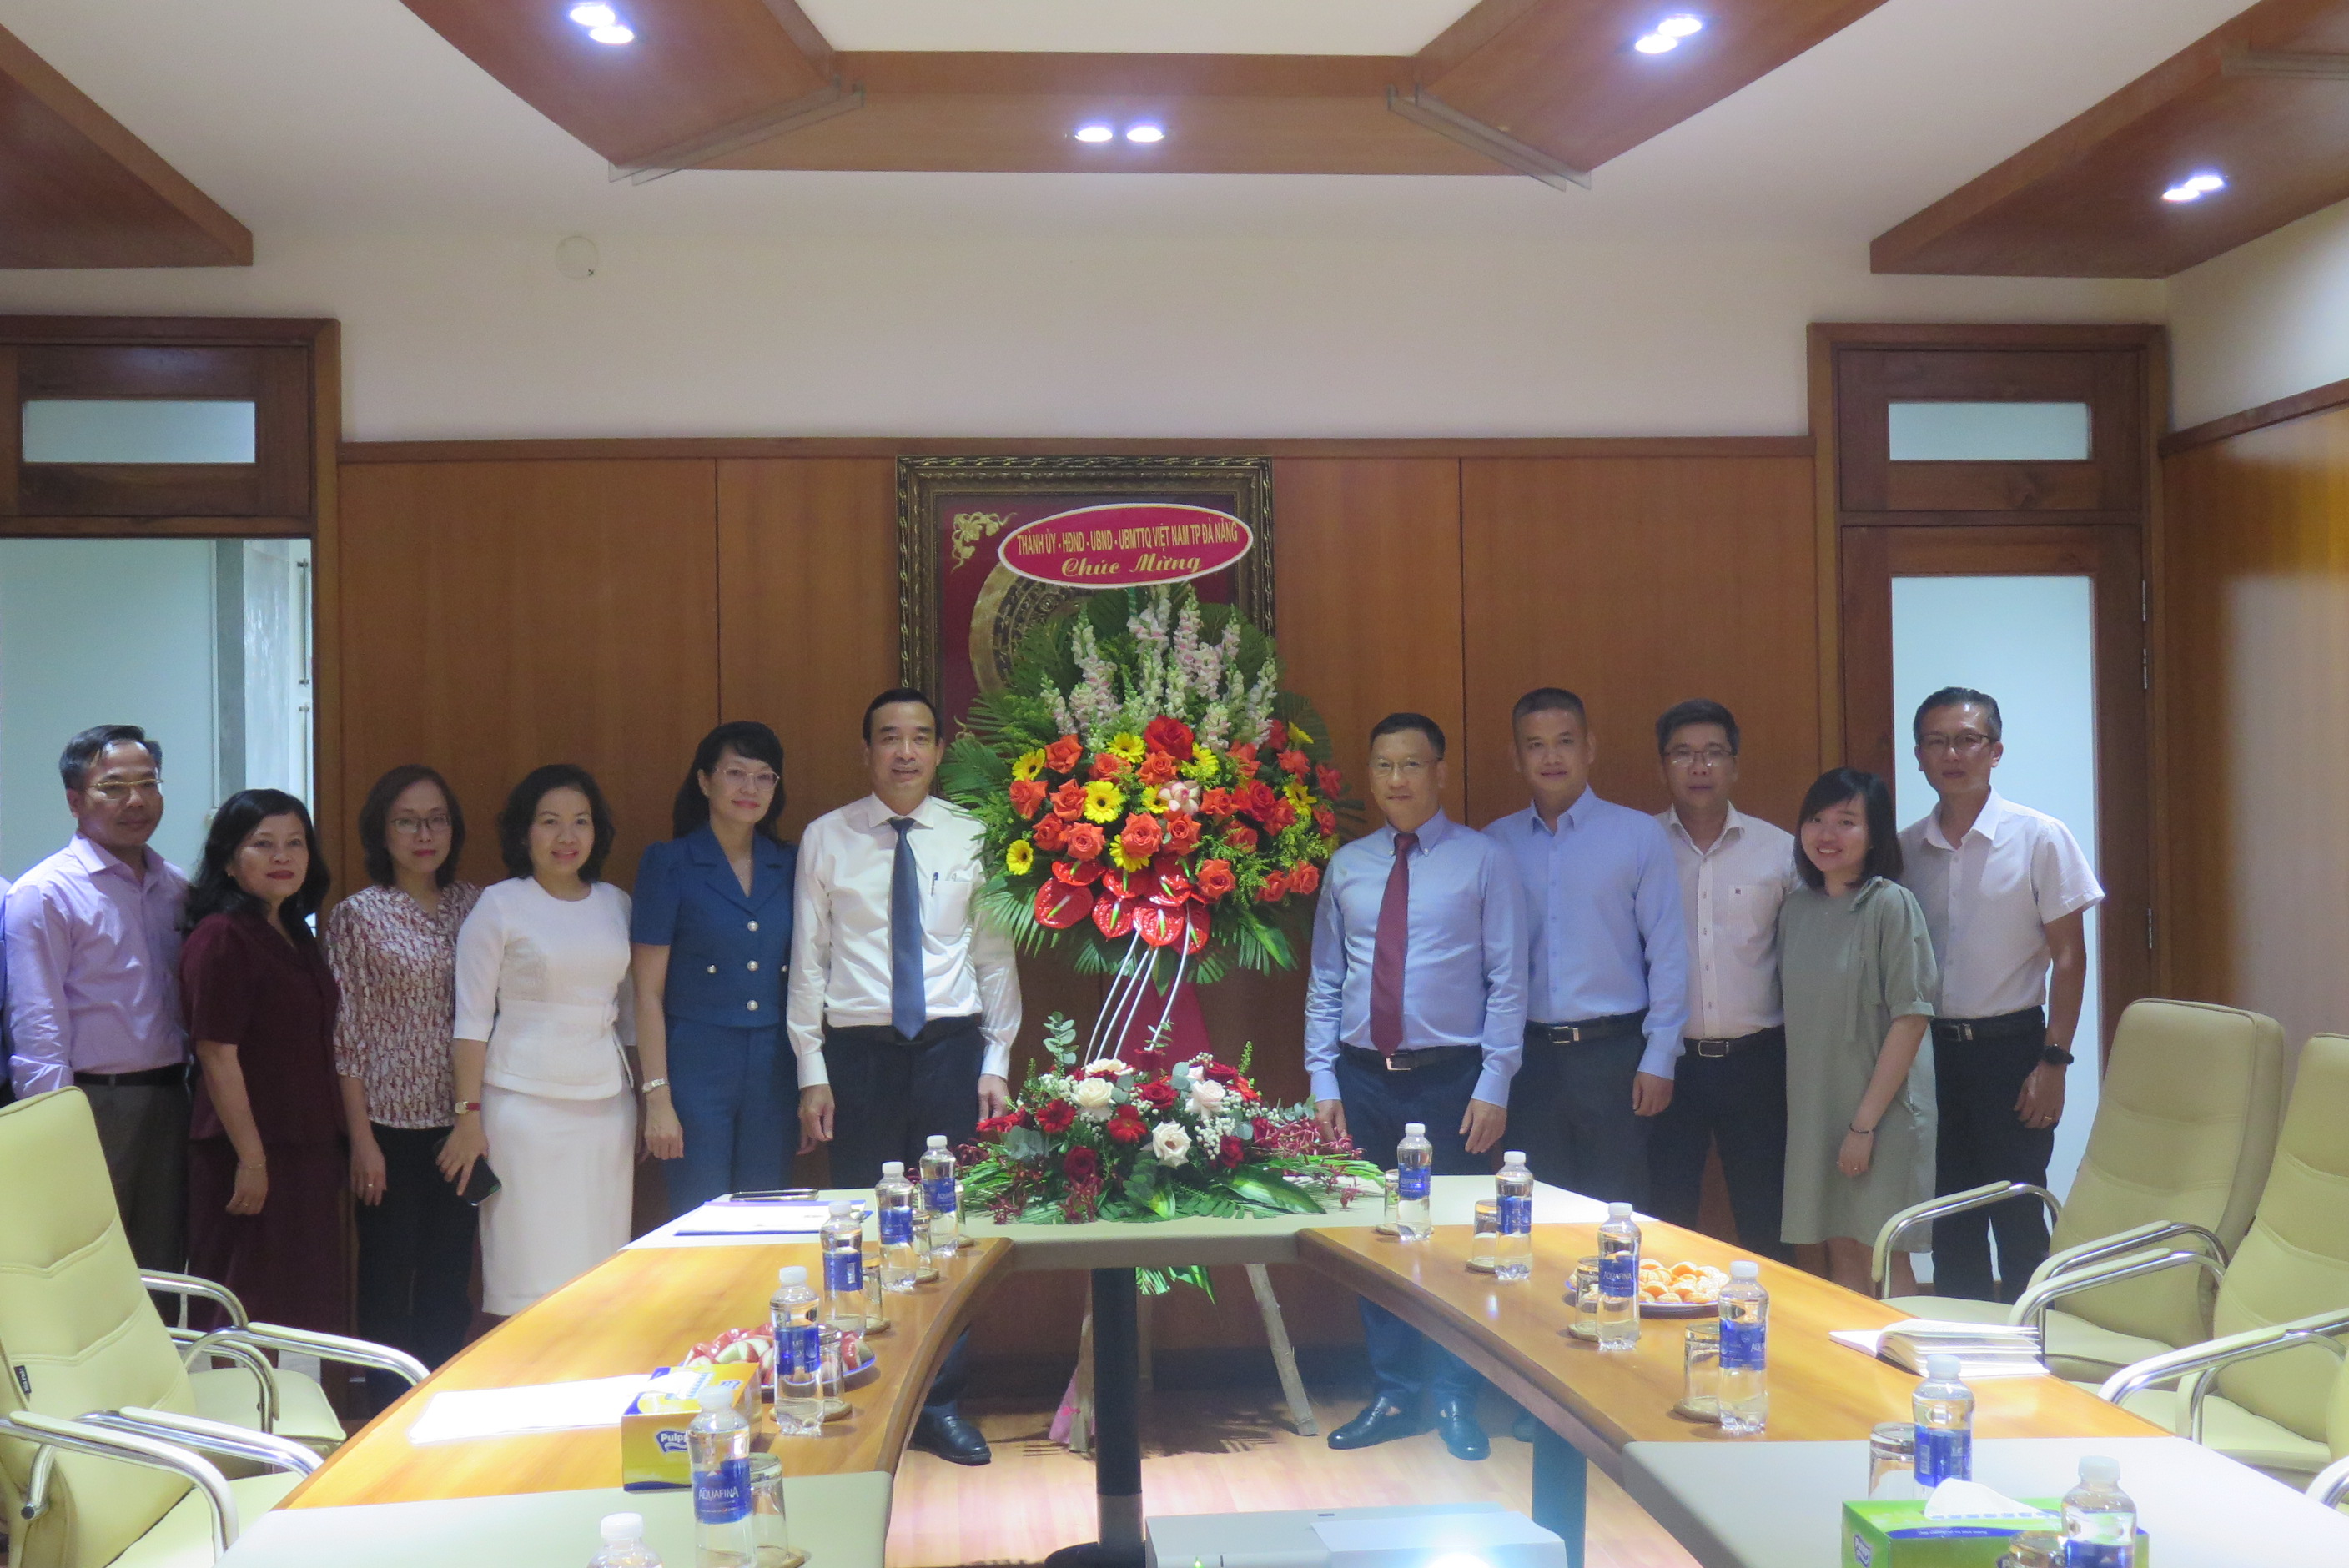 THE CHAIRMAN OF DANANG PEOPLE’S COMMITTEE - LE TRUNG CHINH VISITED DANAPHA JSC ON THE OCCASION OF THE VIETNAM ENTREPRENEURS’ DAY